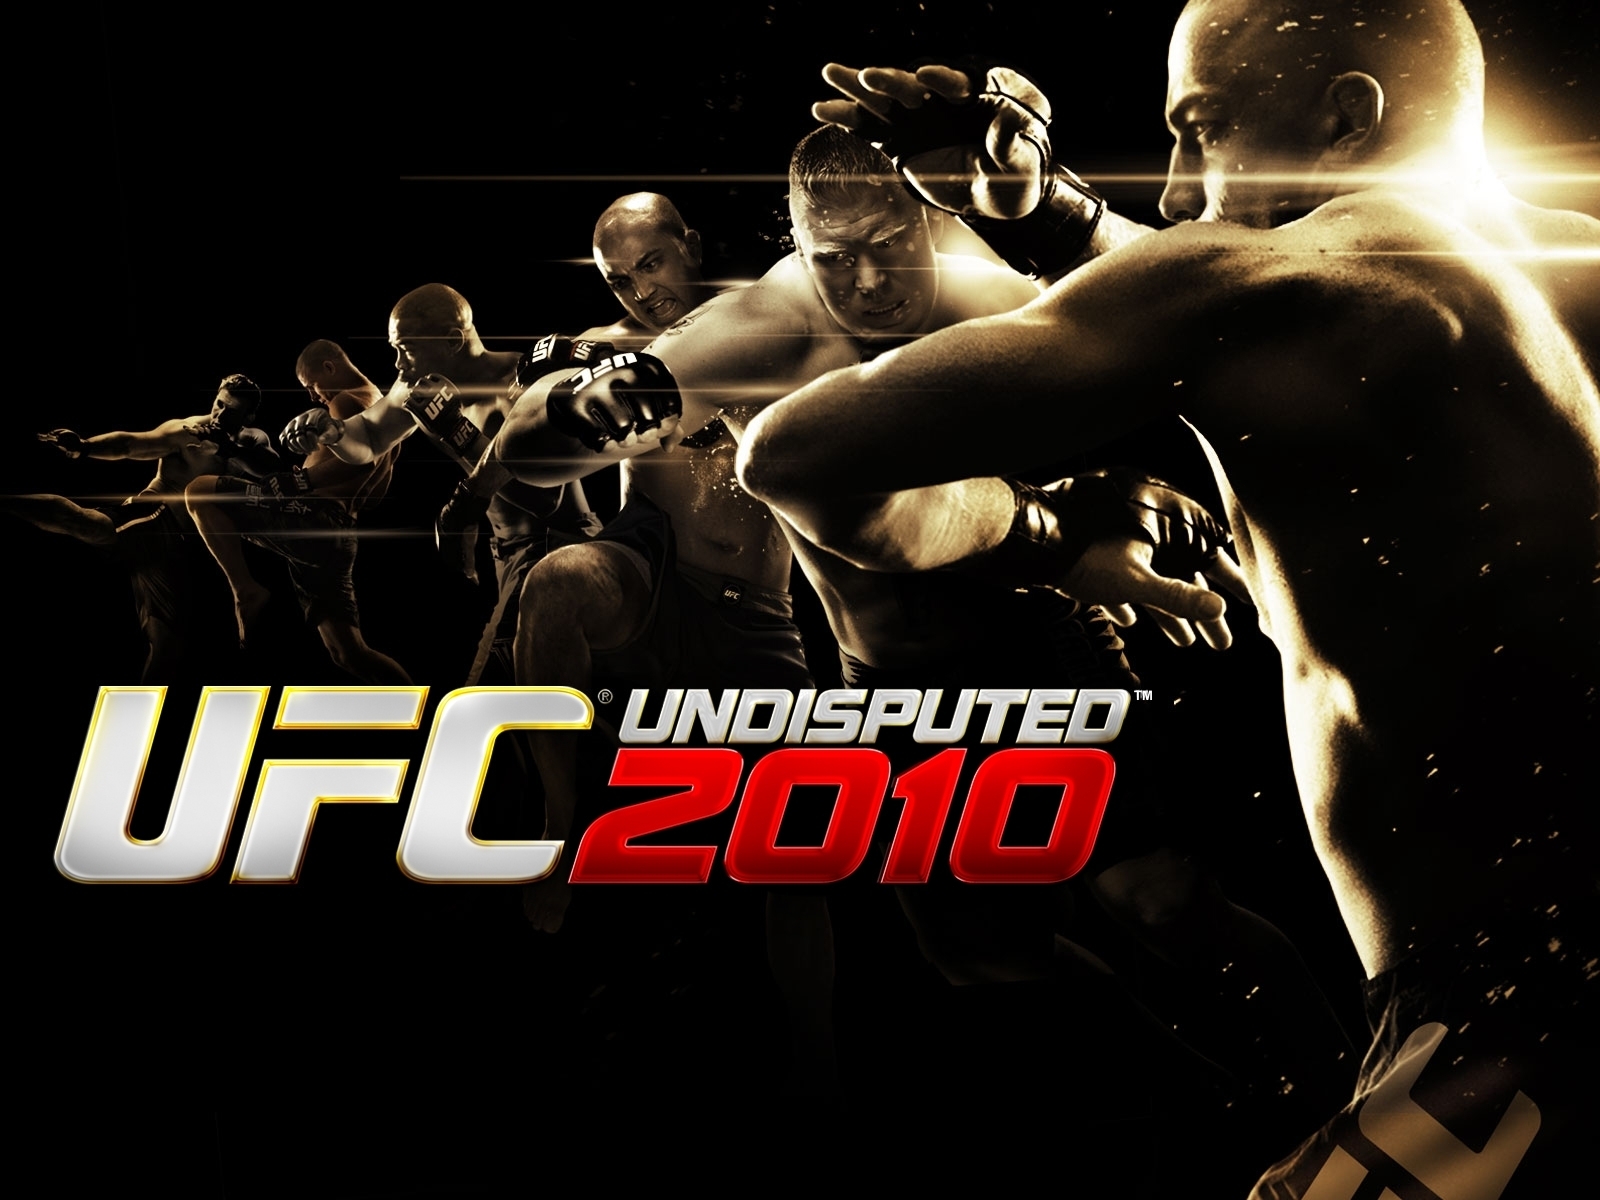 UFC Undisputed 2010 for 1600 x 1200 resolution